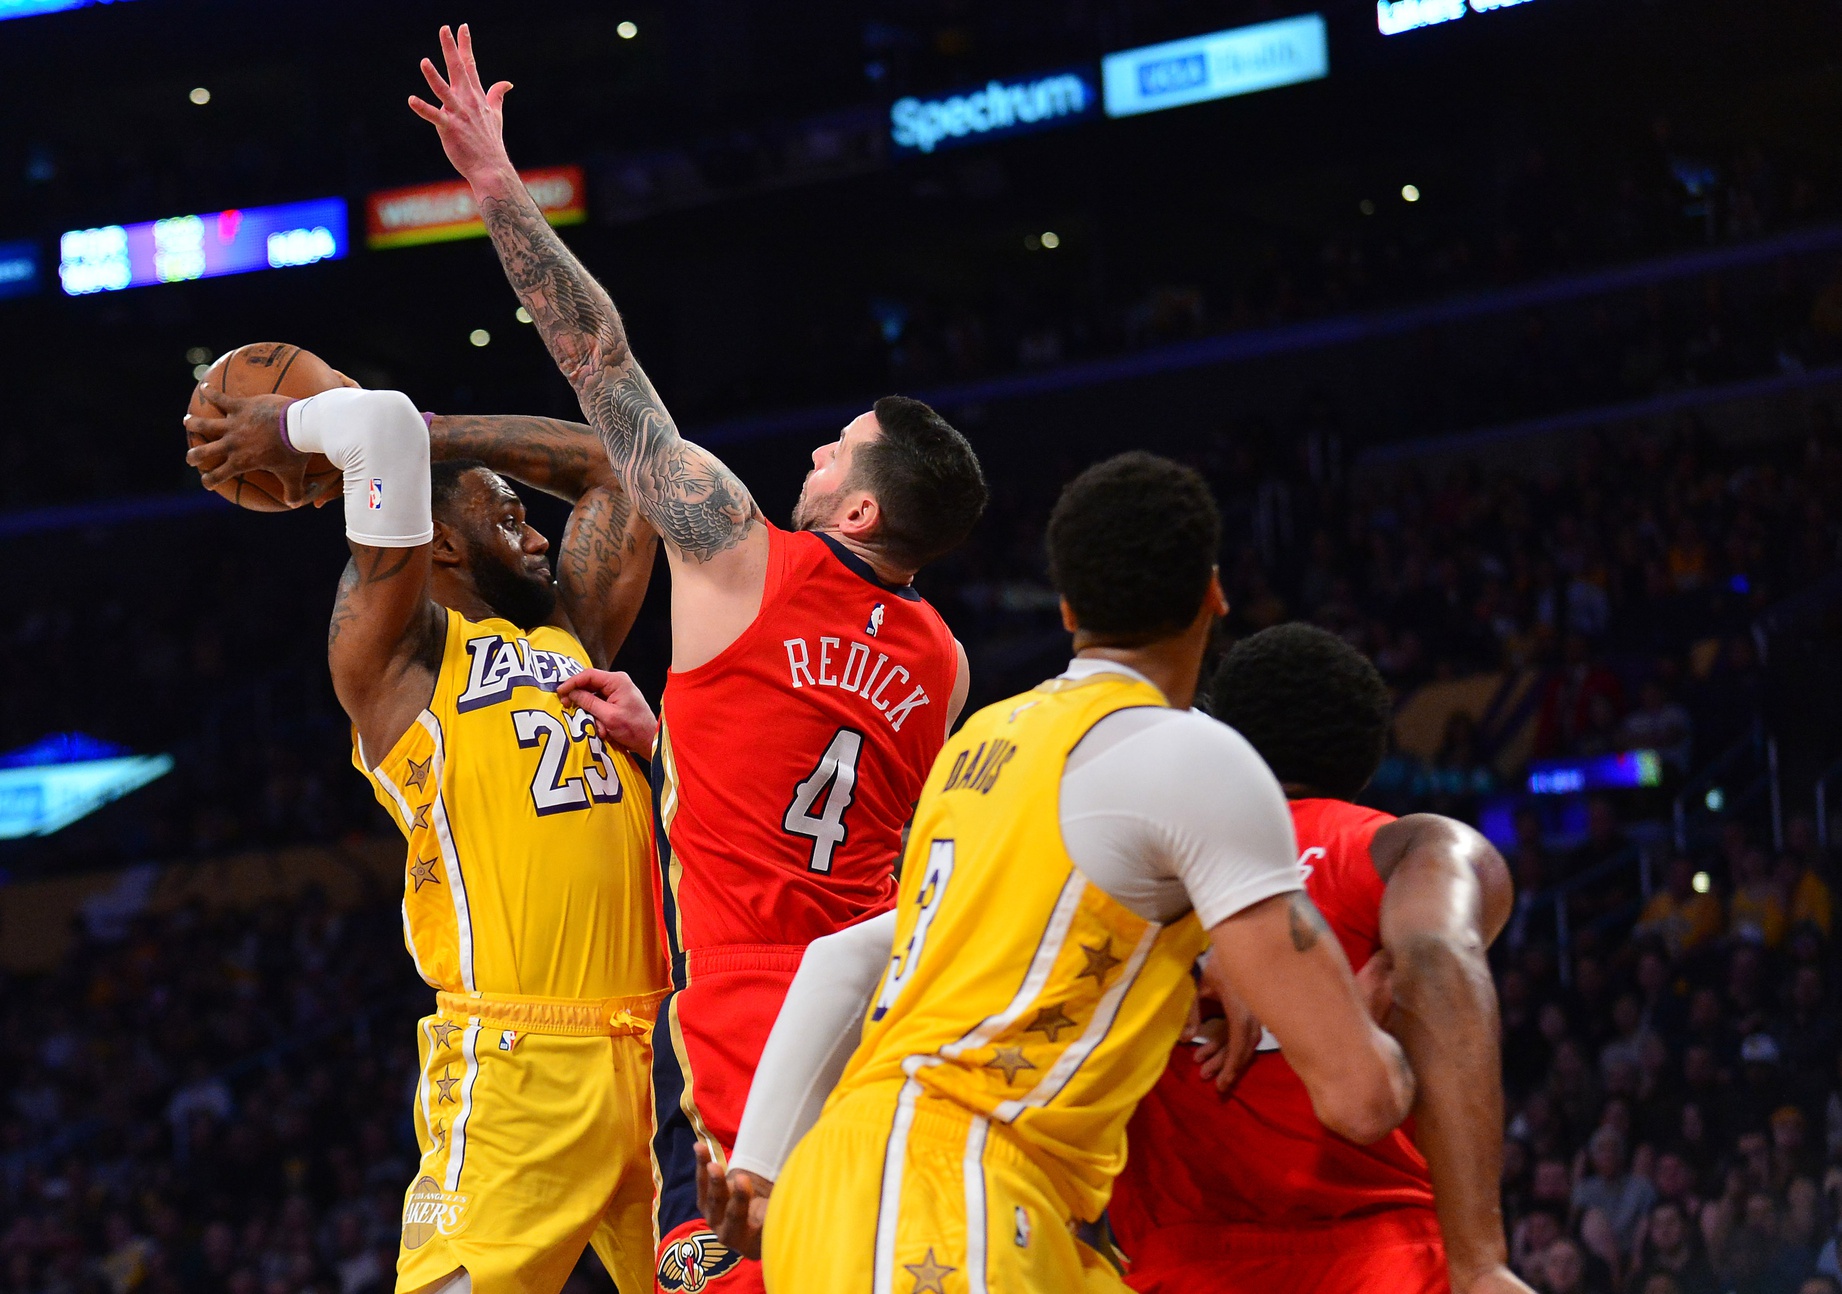 January 3, 2020; Los Angeles, California, USA; Los Angeles Lakers forward LeBron James (23) controls the ball against New Orleans Pelicans guard JJ Redick (4) during the second half at Staples Center. Mandatory Credit: Gary A. Vasquez-USA TODAY Sports